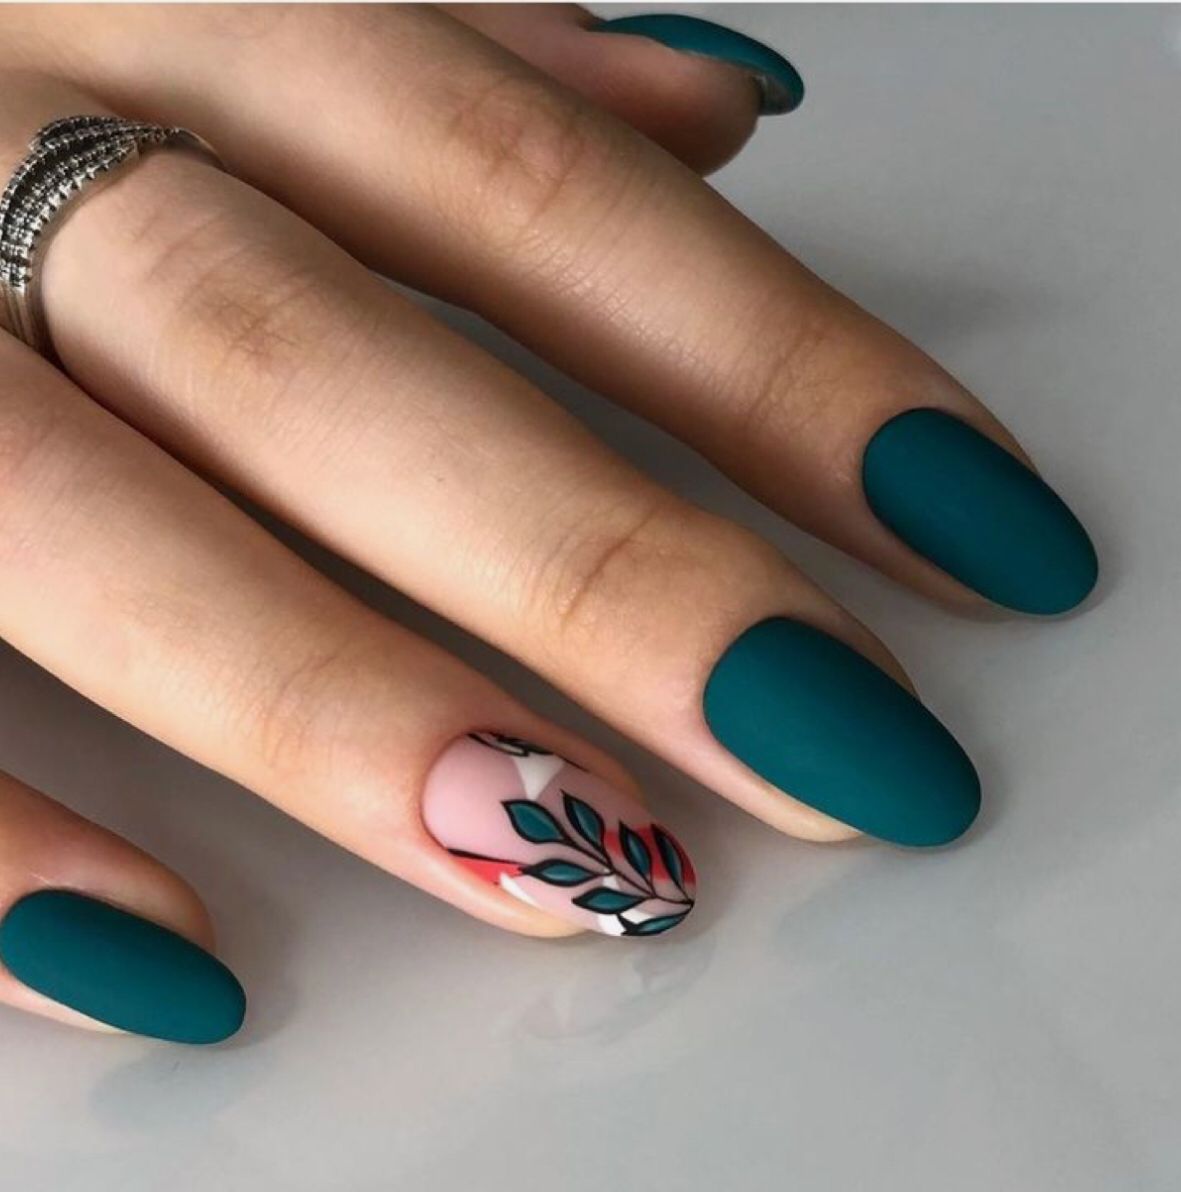 Pin By Marie Kasna On Manikyur In 2020 Emerald Nails Stylish Nails Cute Acrylic Nails